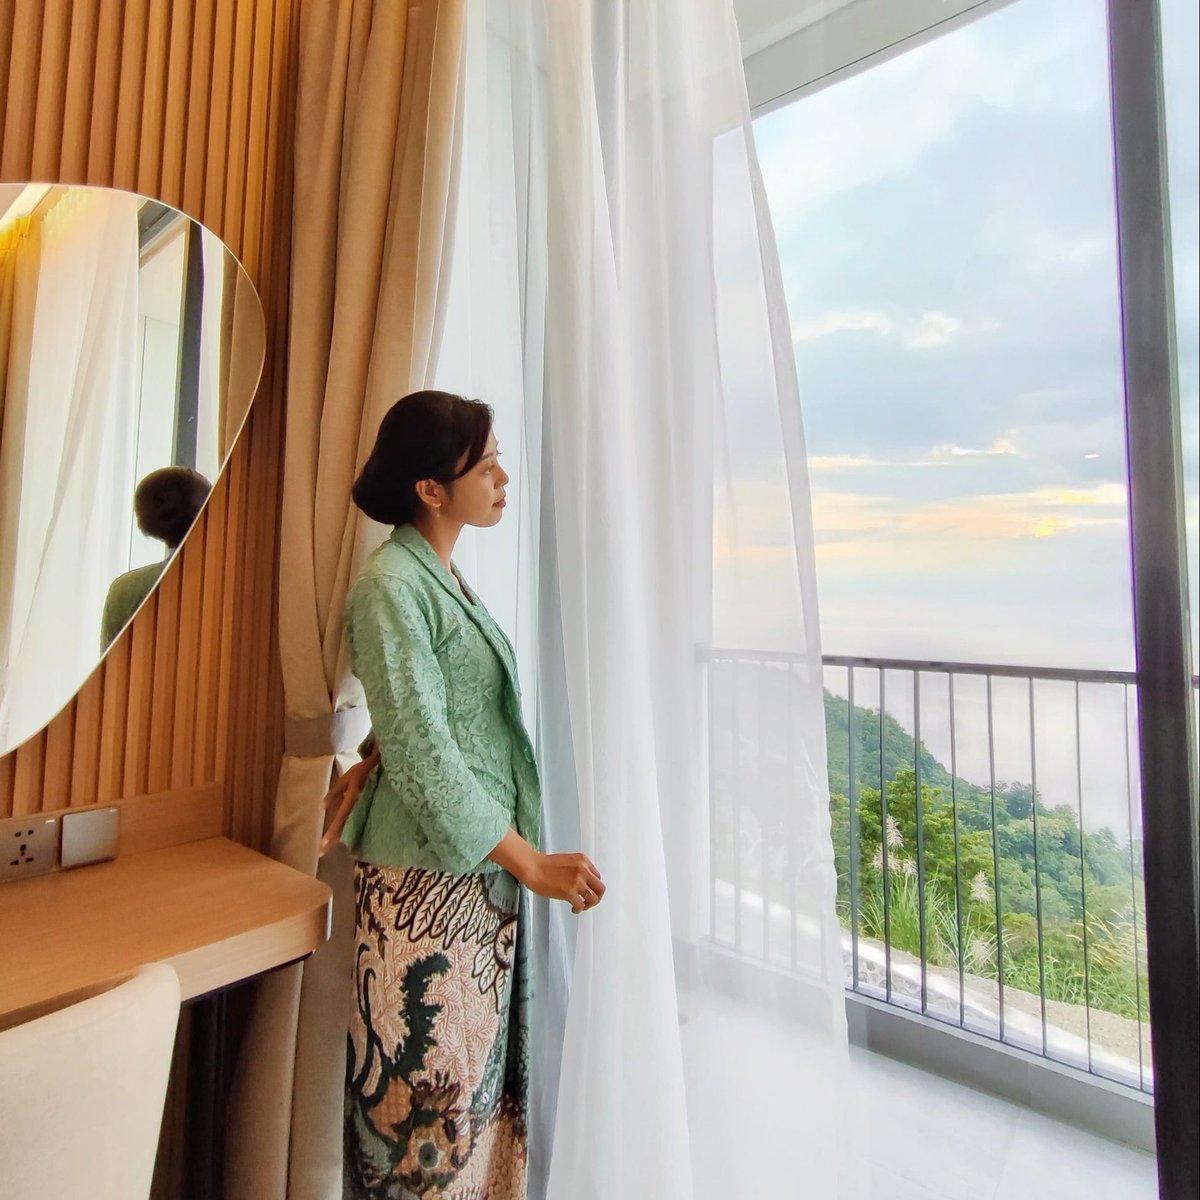 Surrounded by opulent comforts, our hotel room was more than just a place to rest; it was a front-row seat to the awe-inspiring spectacle of the world outside

- Laska Hotel & Resort Ciletuh -

#laskaciletuh
#laskahotelciletuh
#laskahotel
#laskaresort
#ciletuh